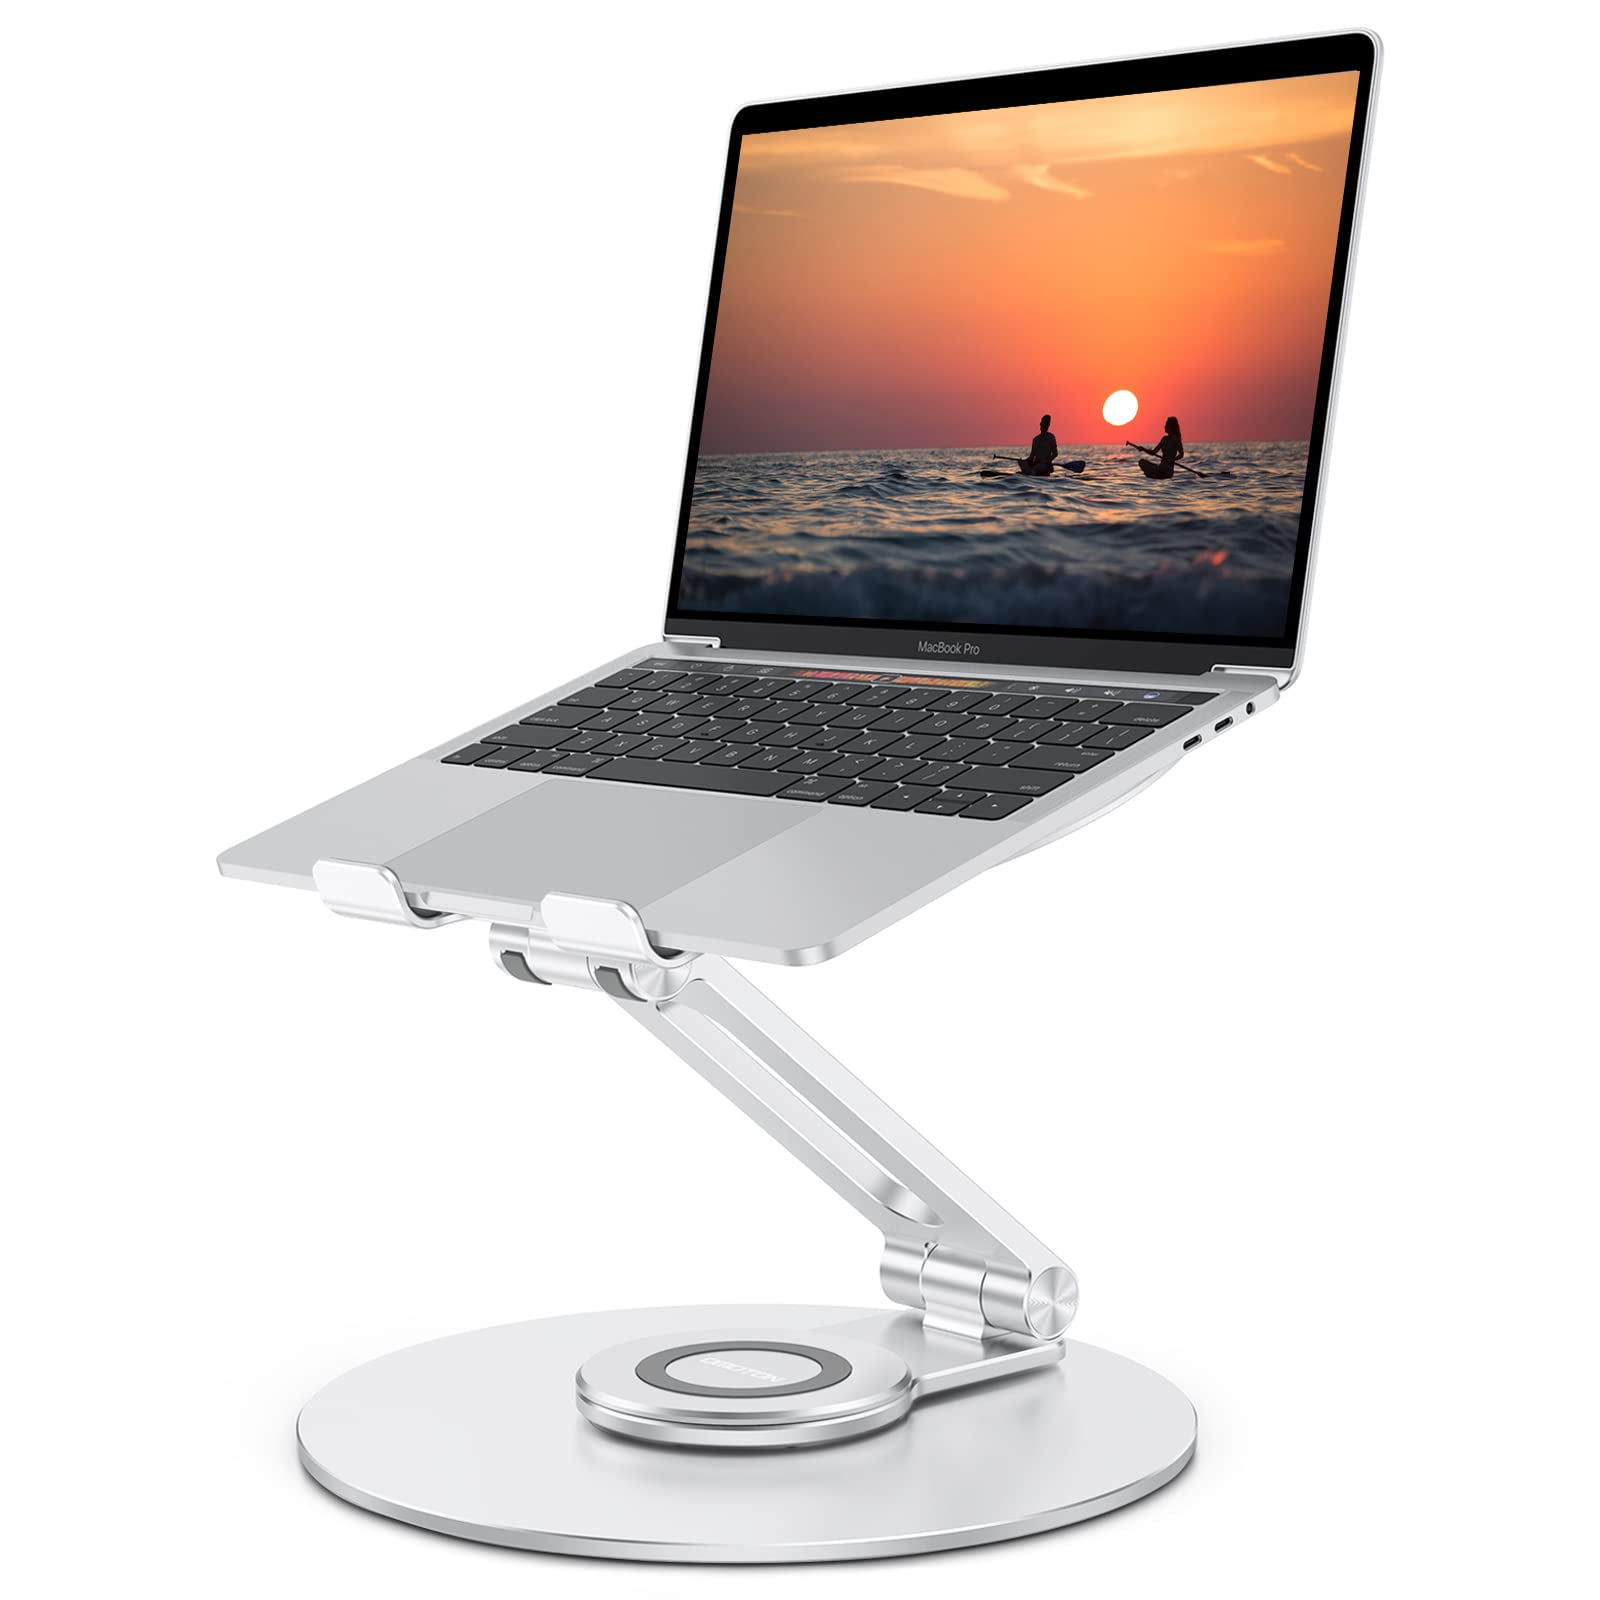 OMOTON Laptop Stand for Desk, Portable Notebook Stand for Collaborative Work, Adjustable 360 Rotating Base with Height, Fully Foldable for Easy Storage Compatible with All Laptops, Up to 17"